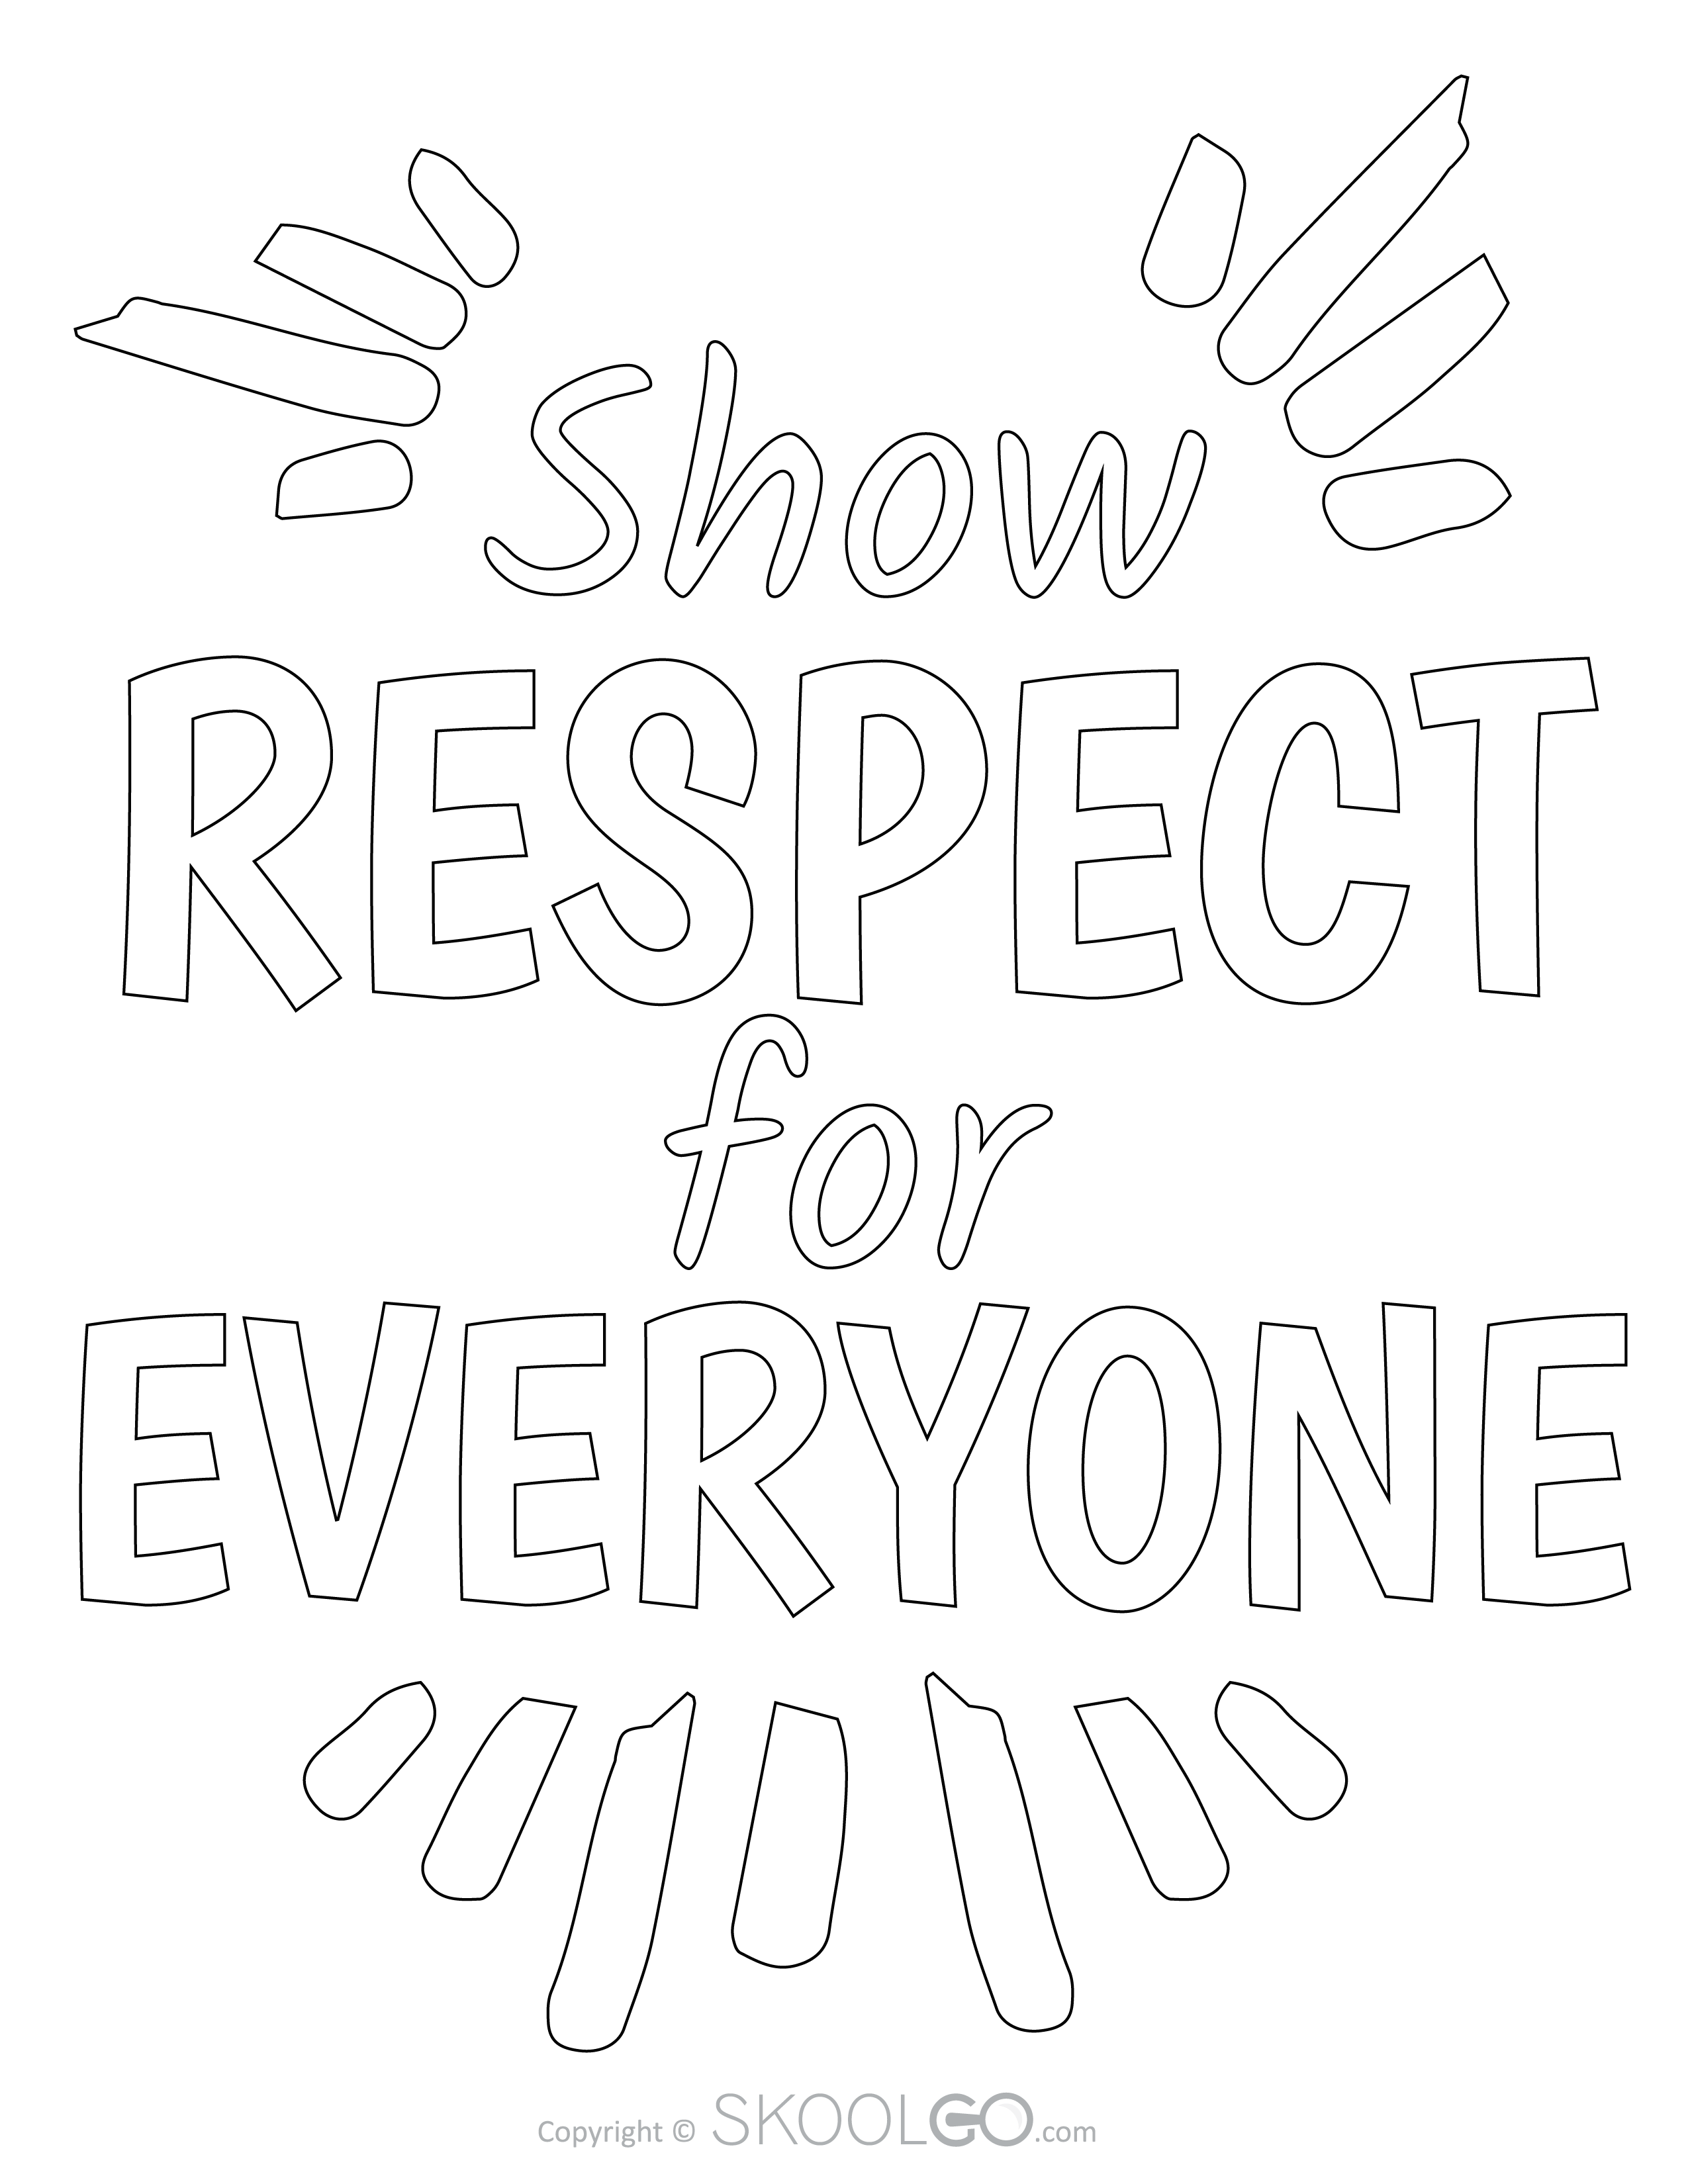 Show respect for everyone